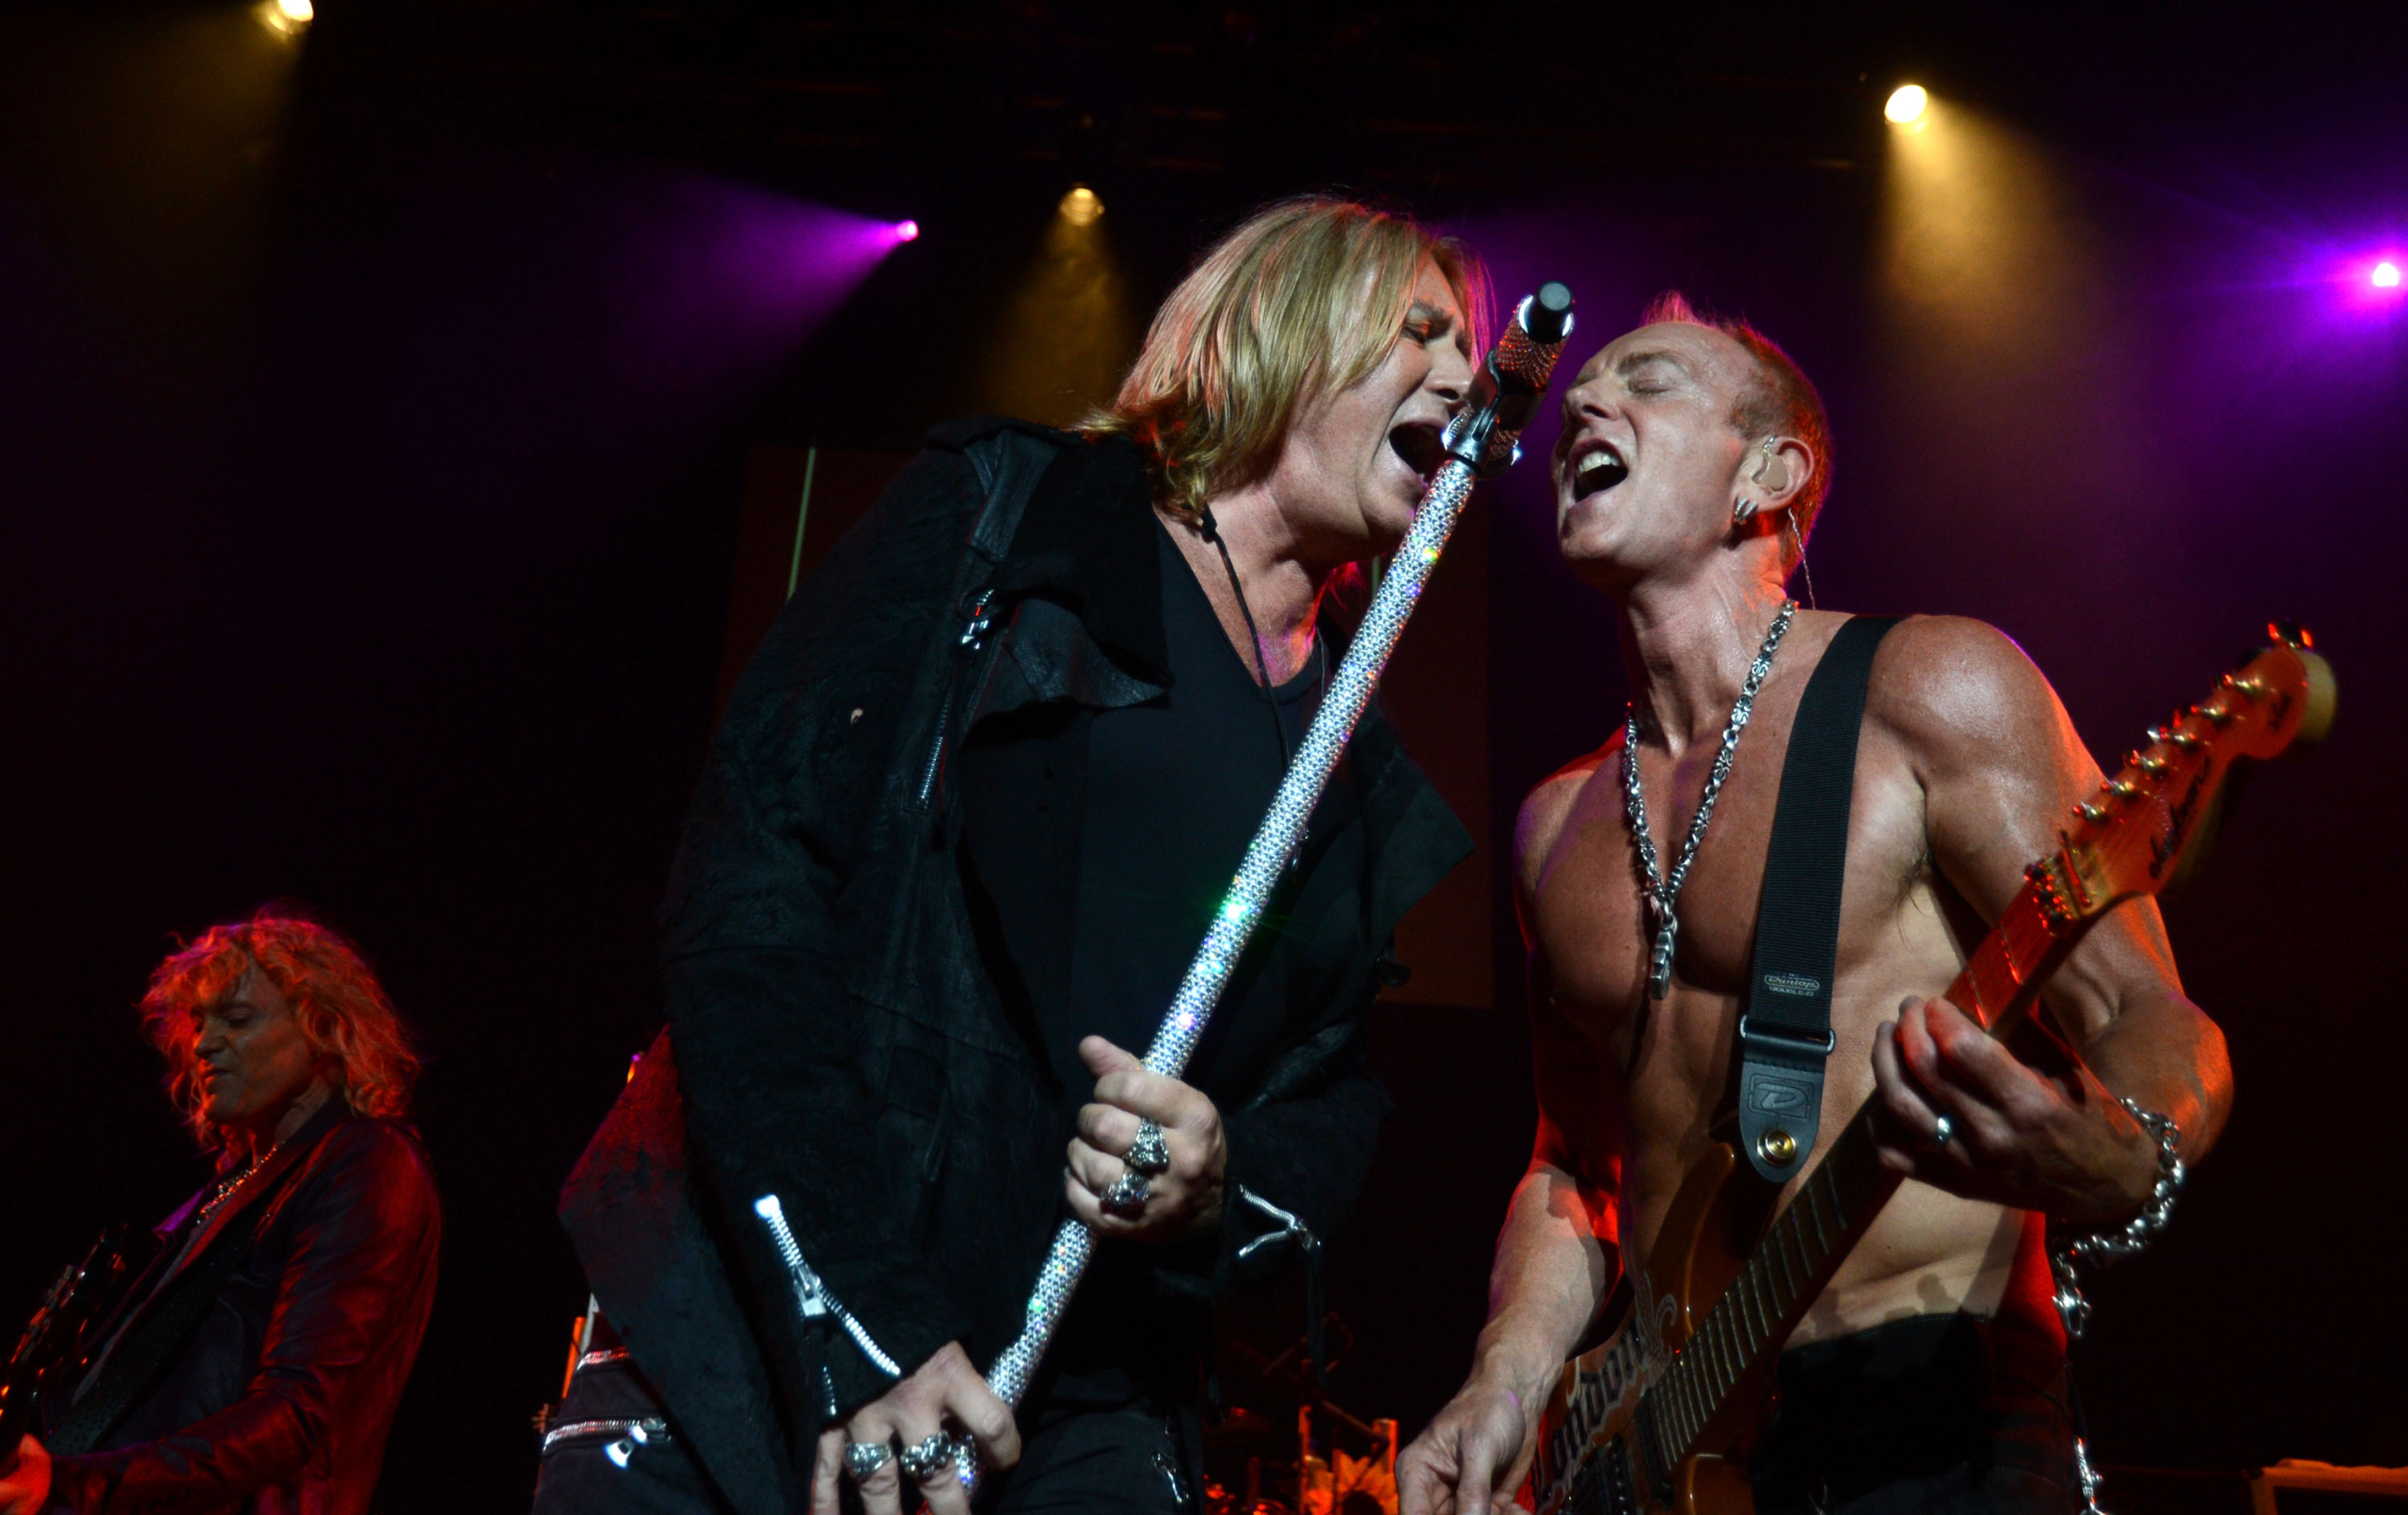 Watch behind the scenes bloopers from Def Leppard and the Stadium Tour!